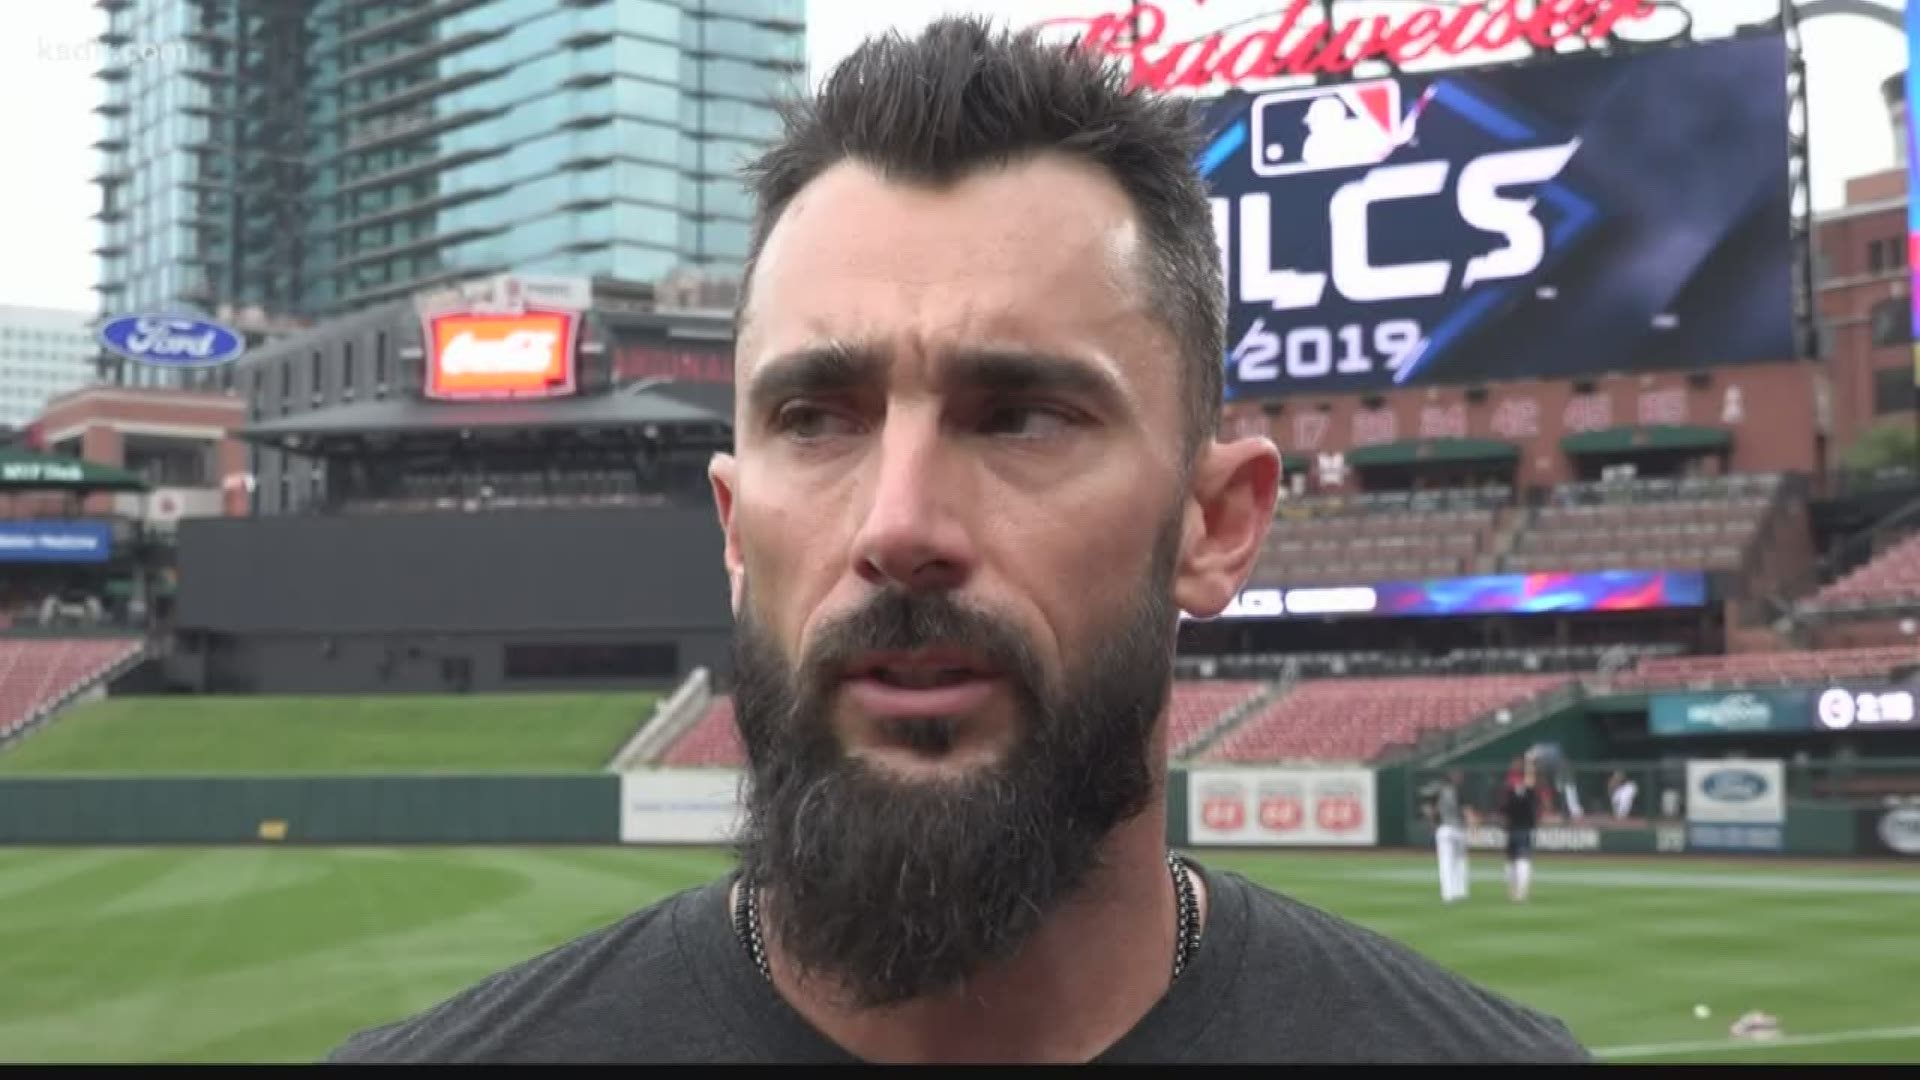 Matt Carpenter took himself out of the game in the first inning for the good of the team.